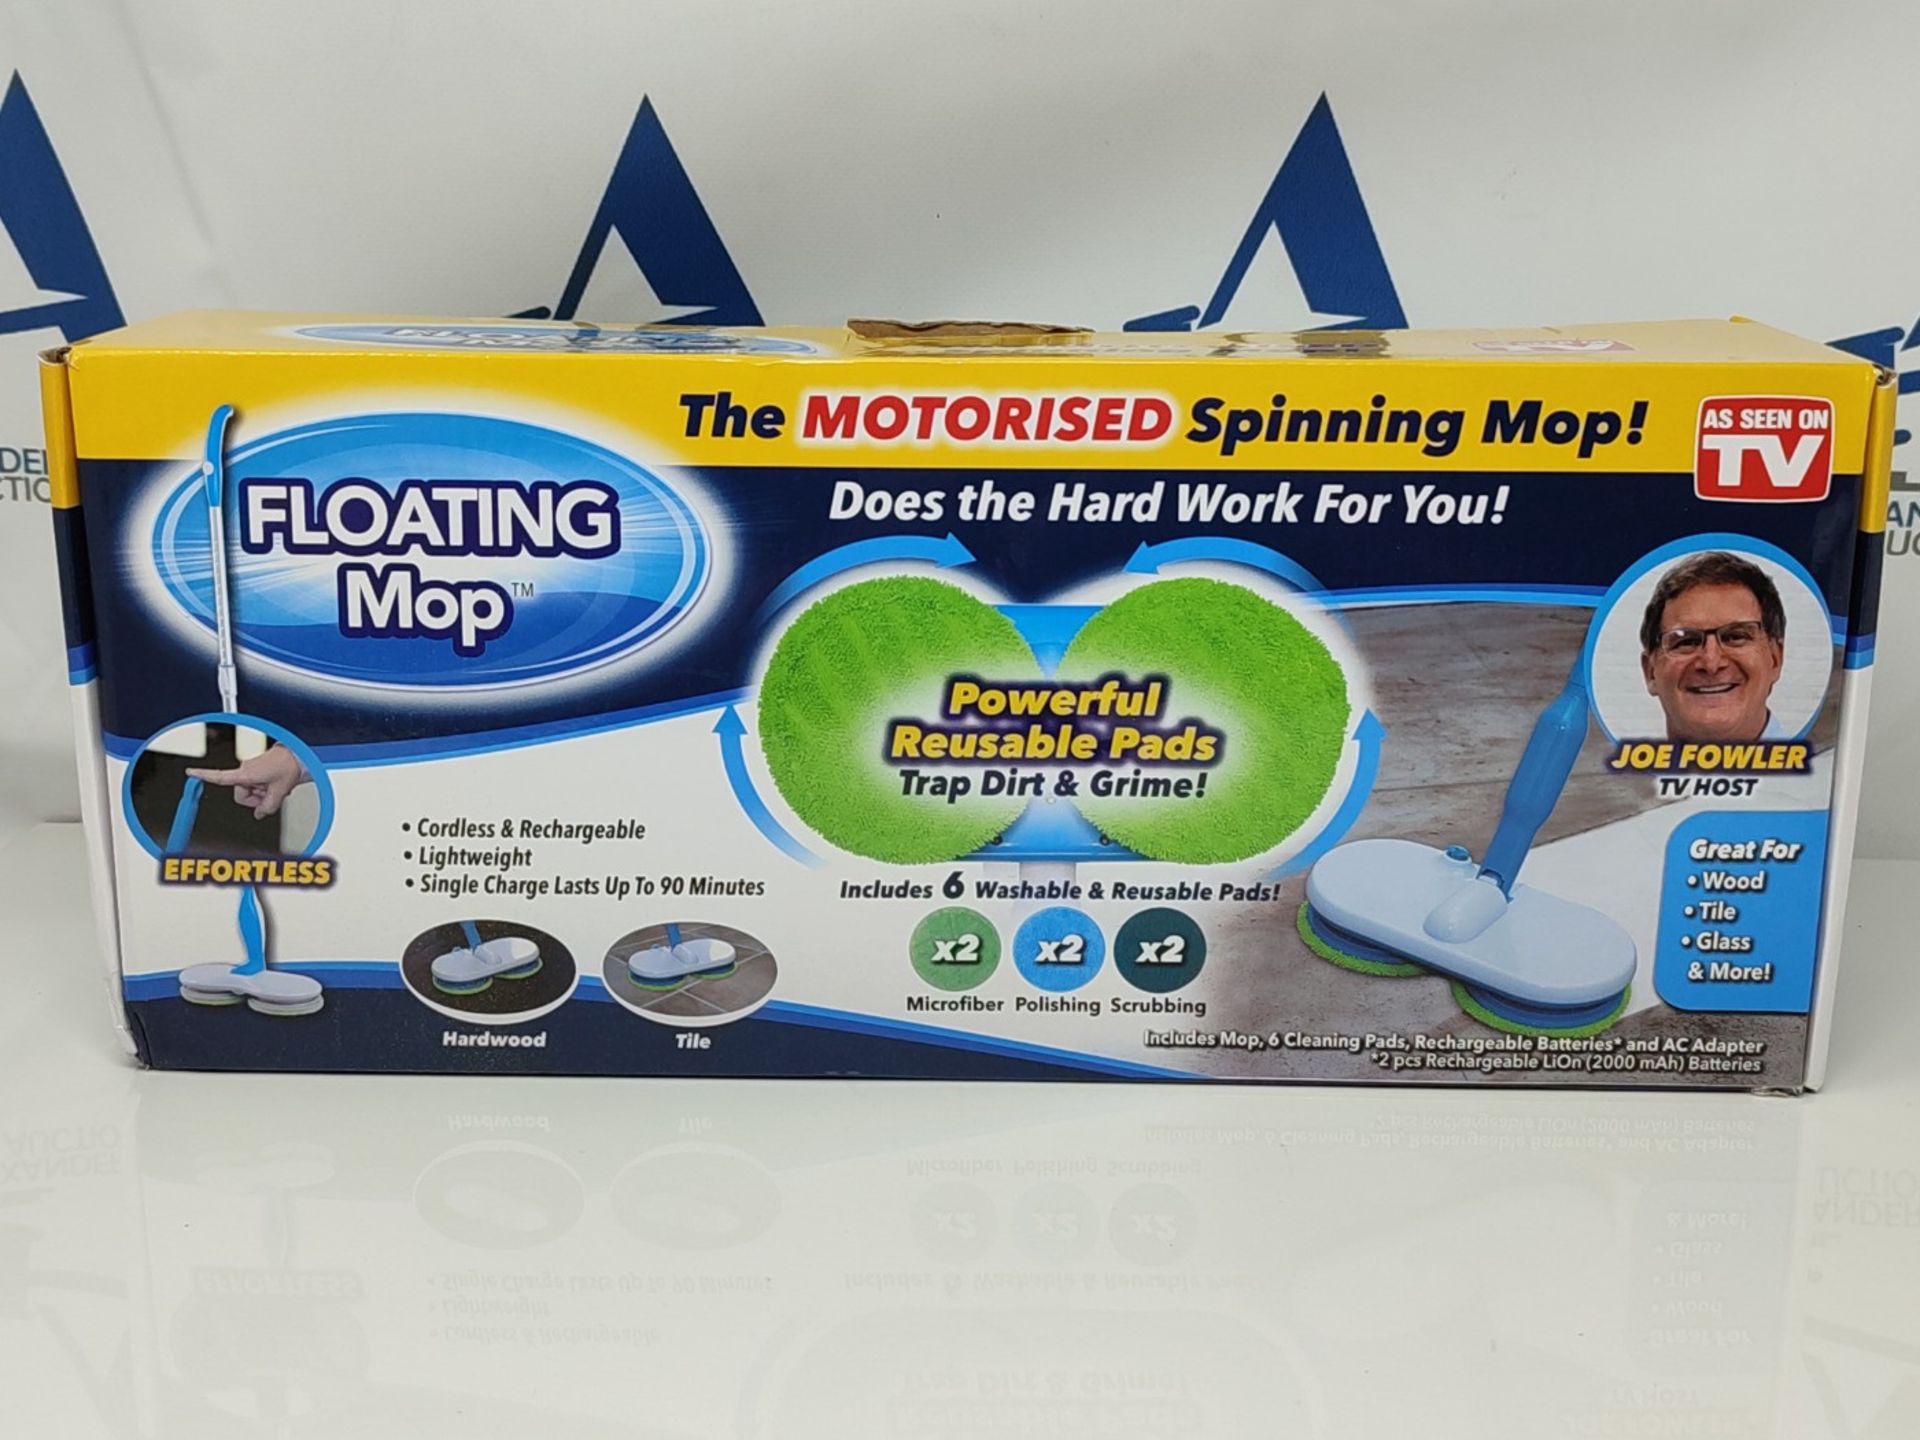 High Street TV Floating Mop - Motorised Cordless & Rechargeable - Spinning Mop - Inclu - Image 5 of 6